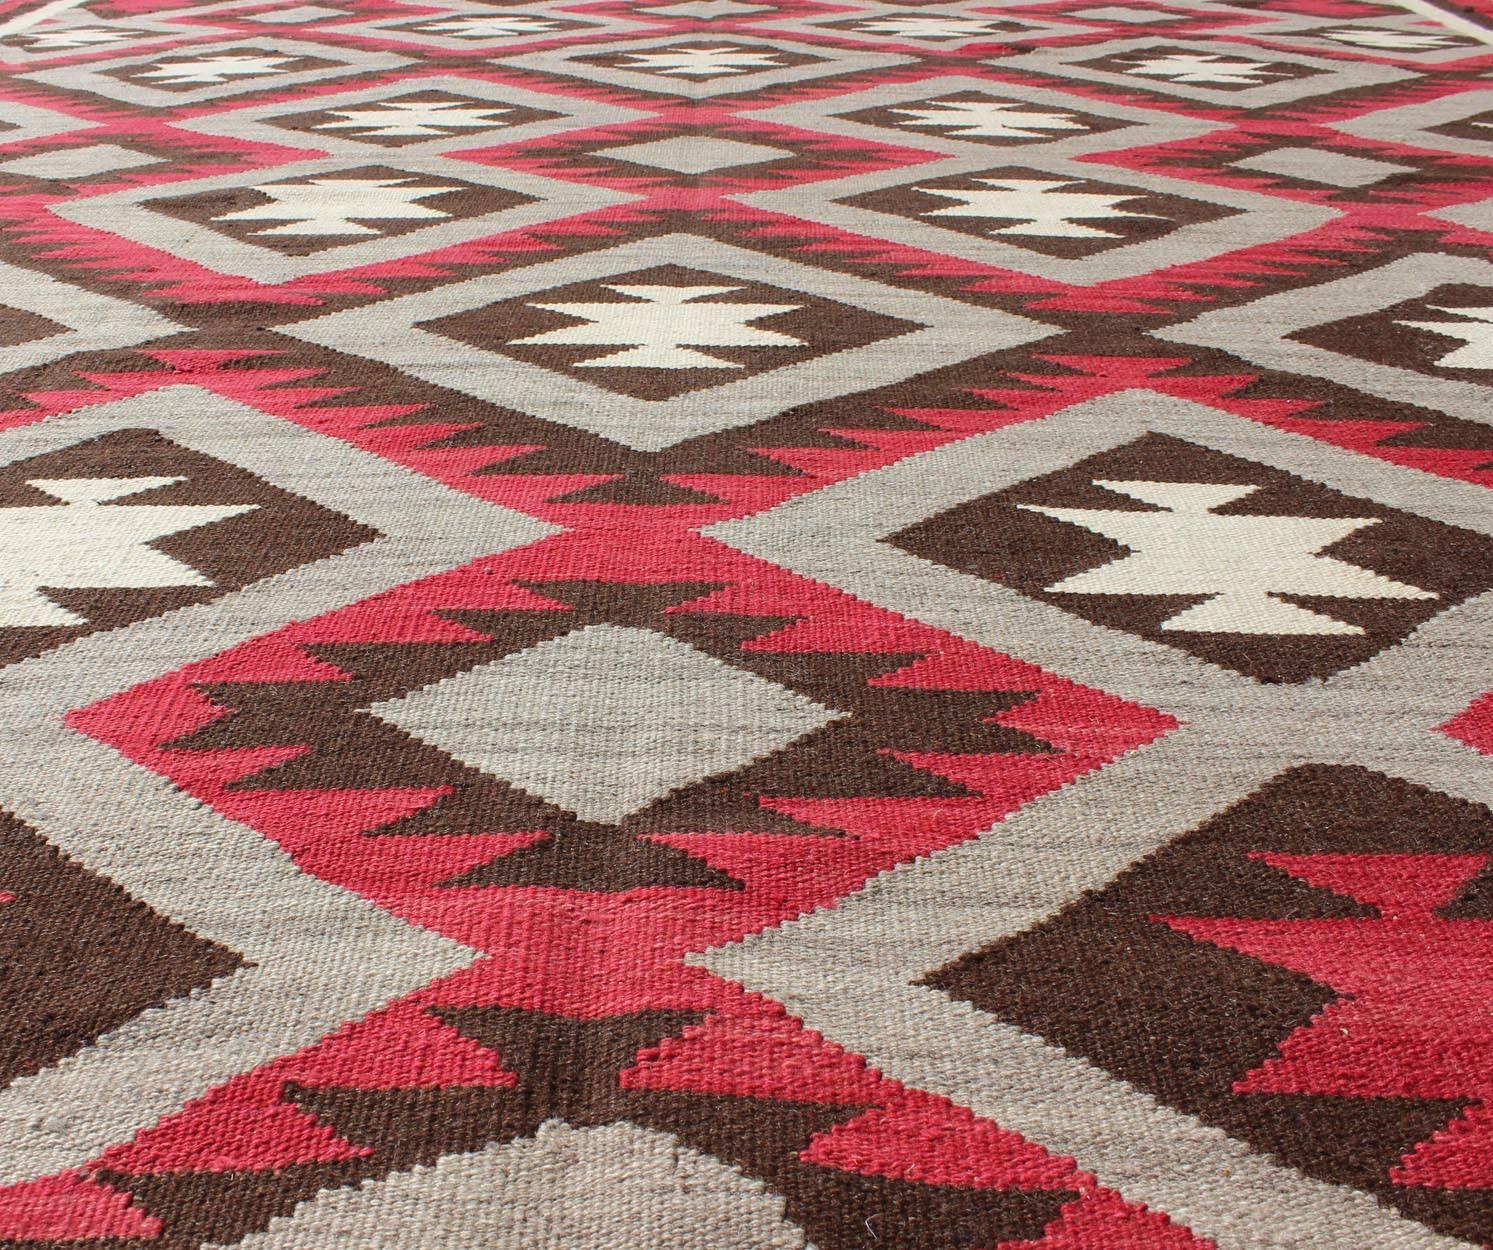 Wool Large American Navajo Design Rug with Latticework Tribal Design in Red and Gray